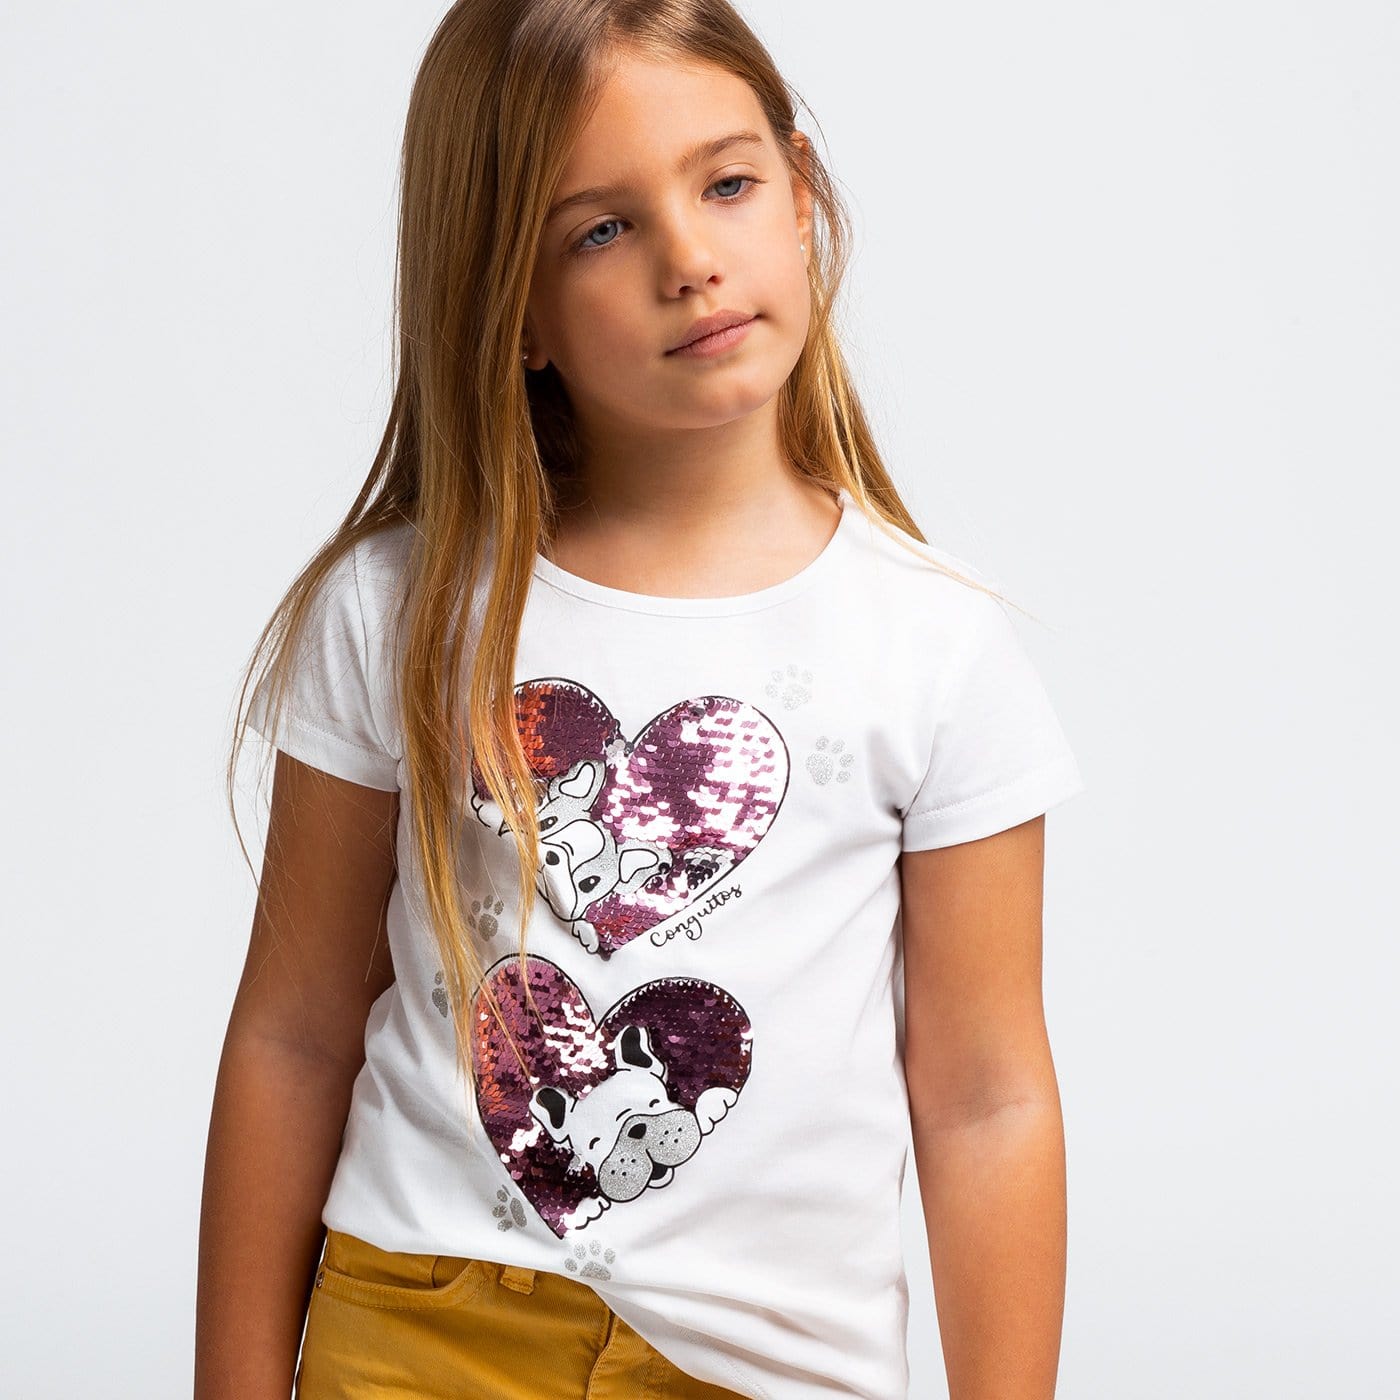 CONGUITOS TEXTIL Clothing Girl's Puppies Reversible Sequins T-Shirt